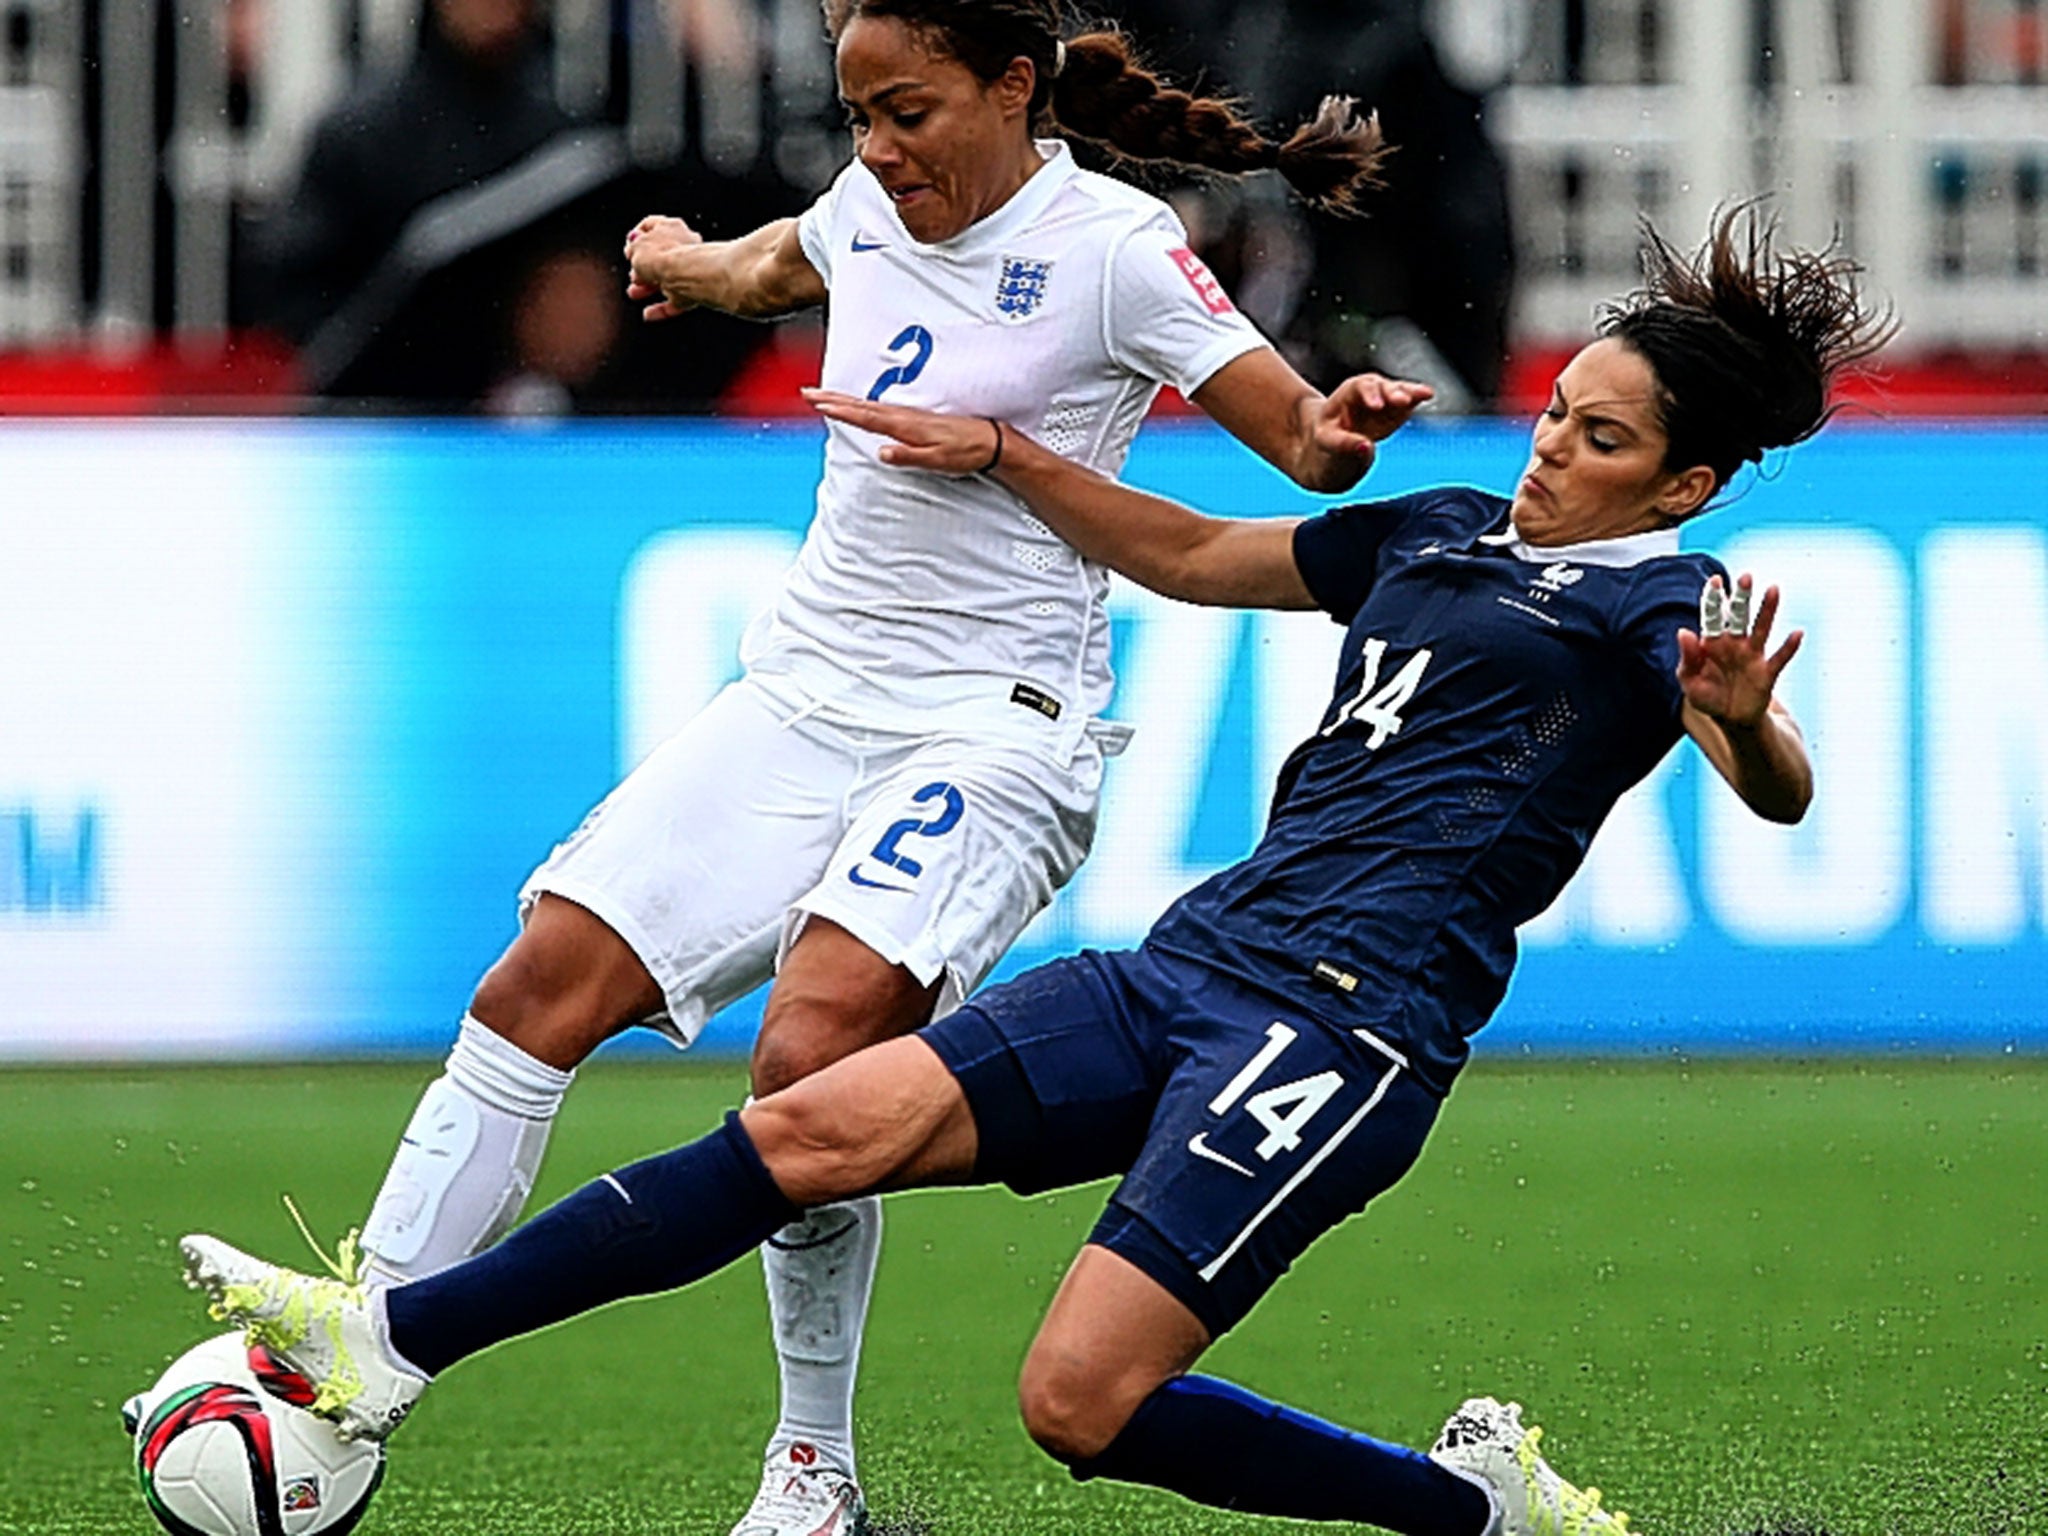 Our manager, Mark Sampson, had a game plan to try to nullify the threat of key French player Louisa Nécib (right) in our opening game of the World Cup